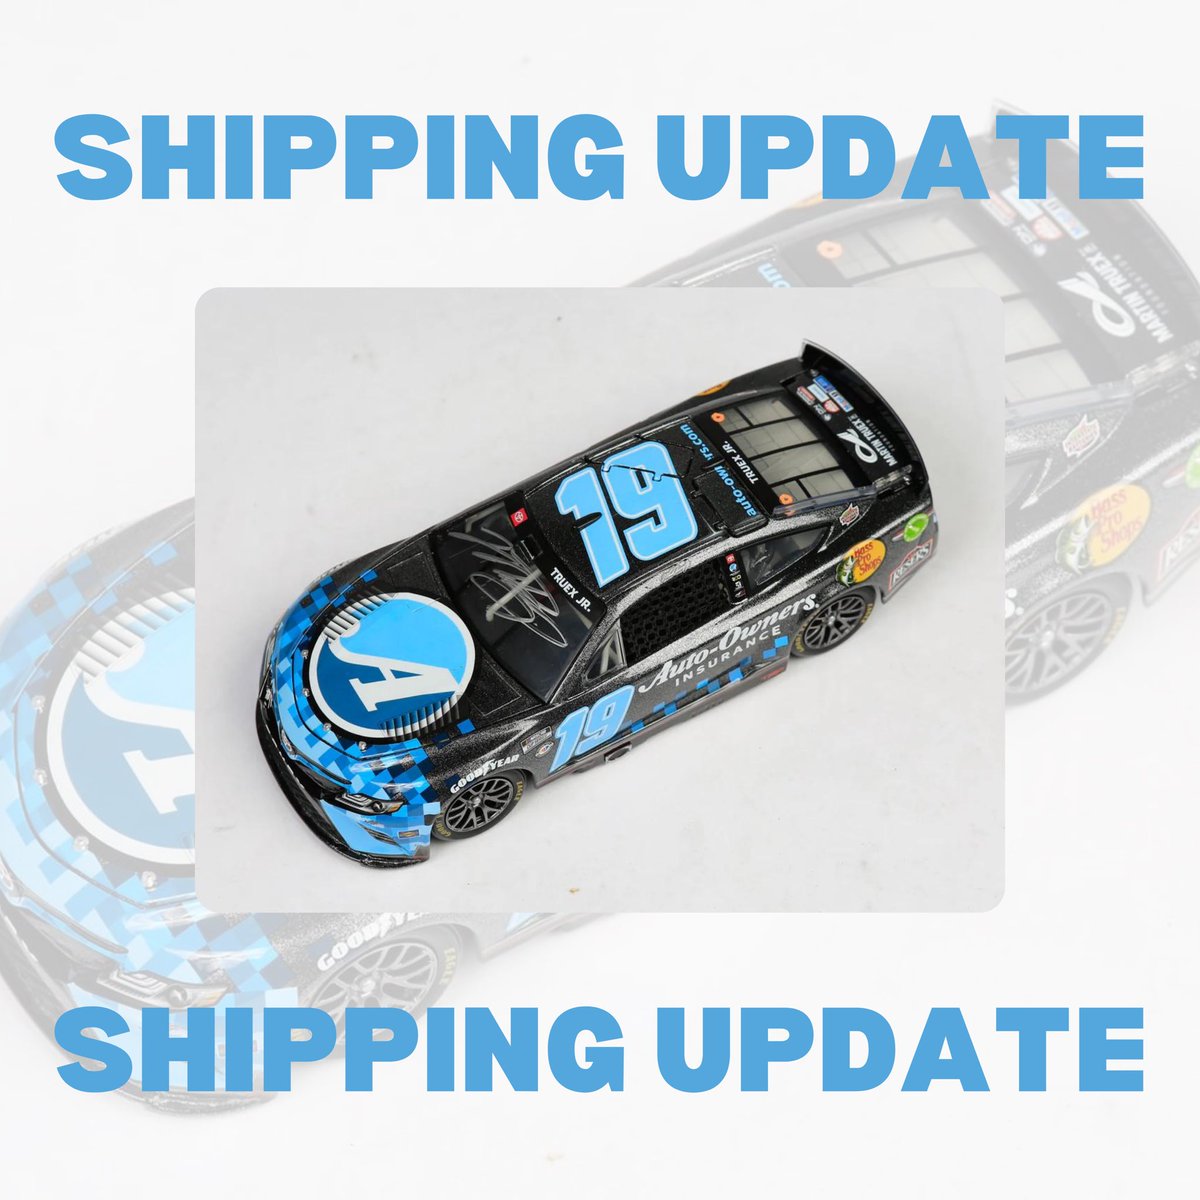 UPDATE❕ All 2023 Auto-Owners Insurance/MTJF Galaxy Diecasts are expected to ship out starting next week. We appreciate your patience!